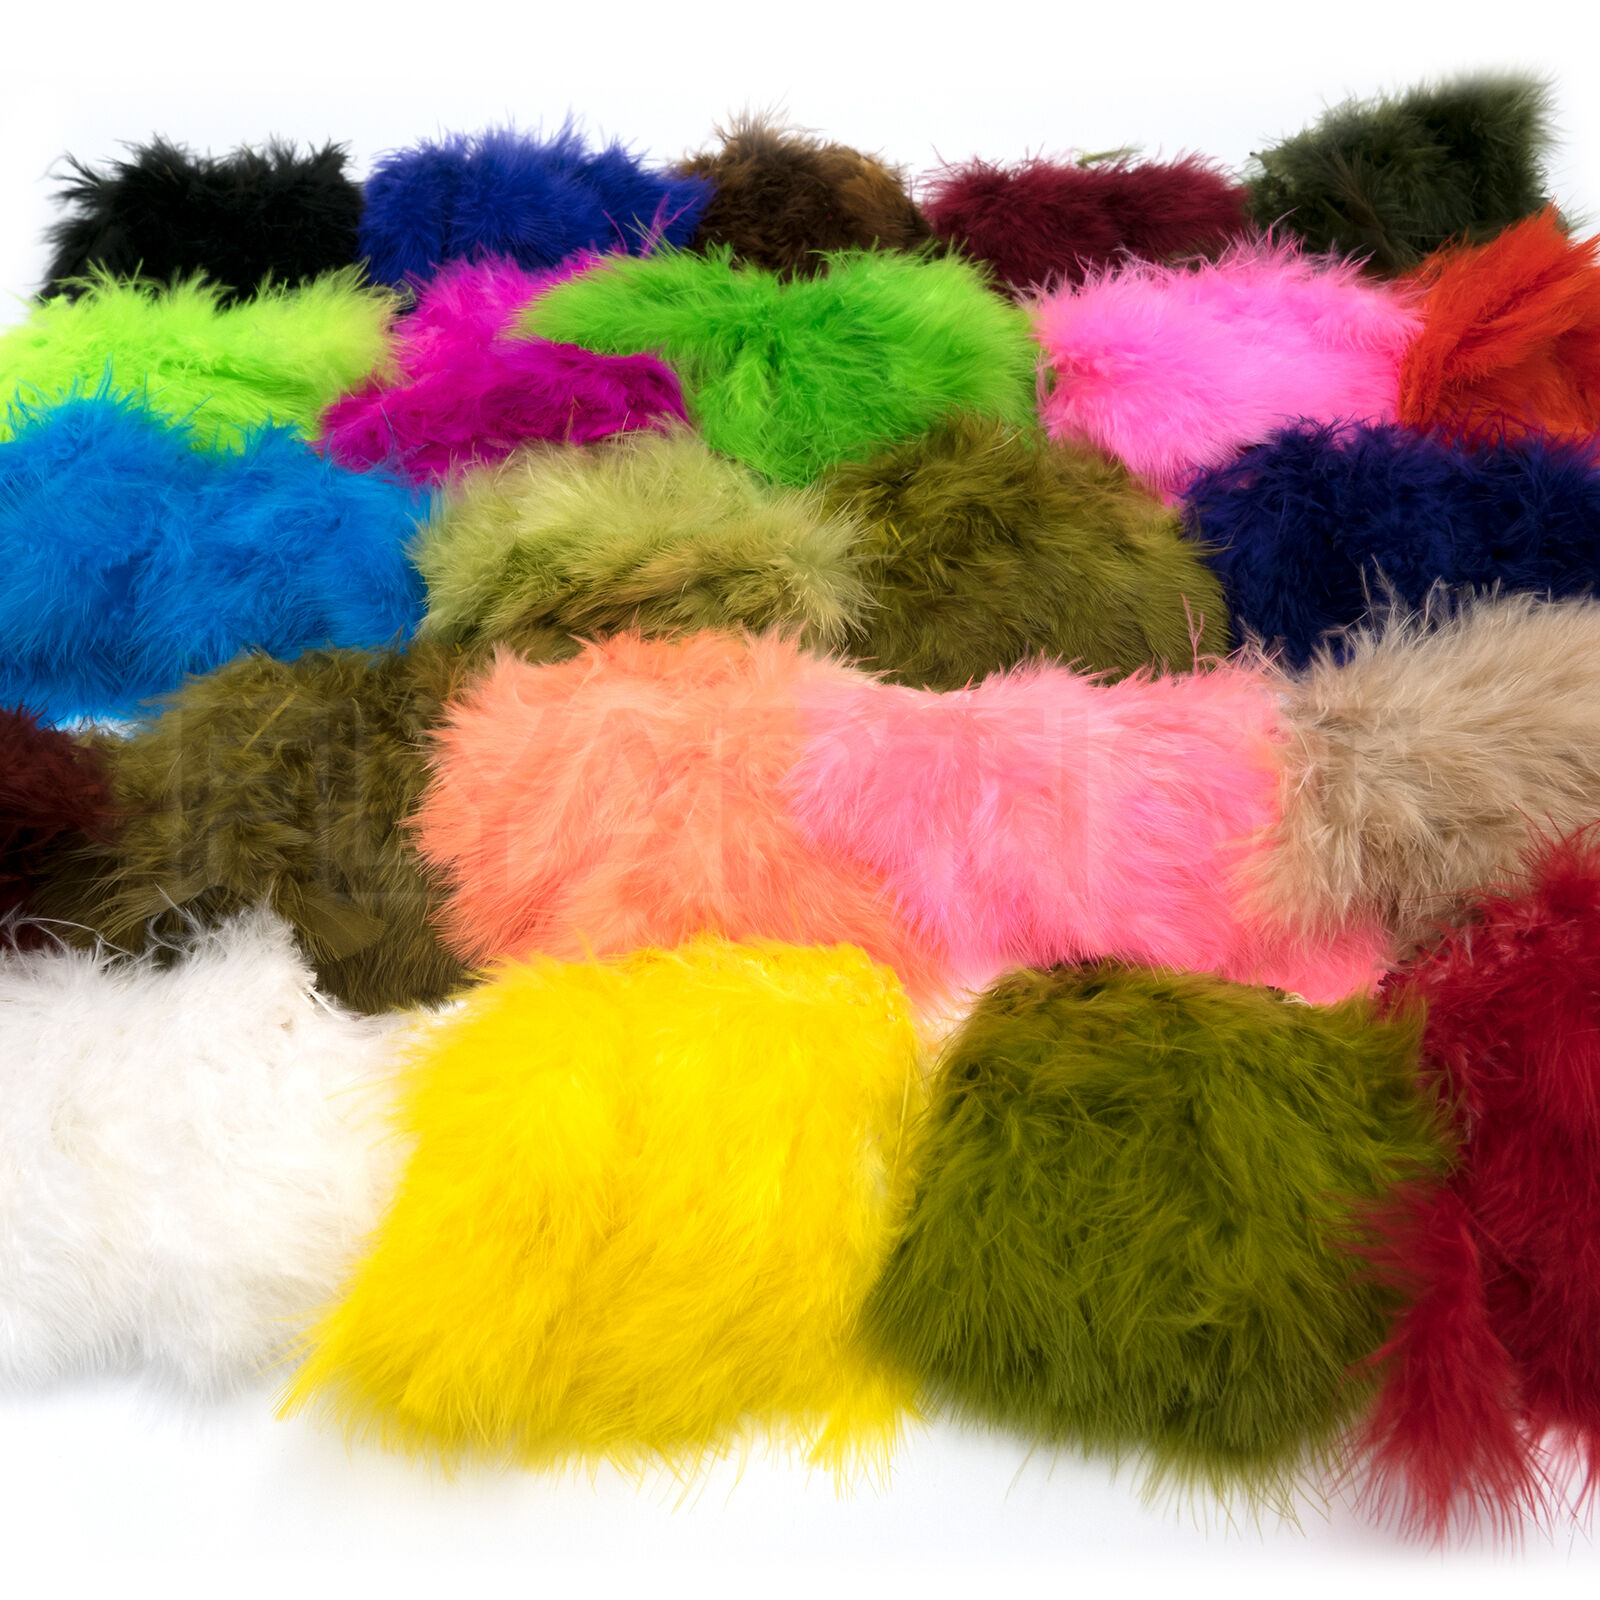 Wooly Bugger Marabou - Strung Fly Tying & Jig Feathers Hareline 24+ Colors New!